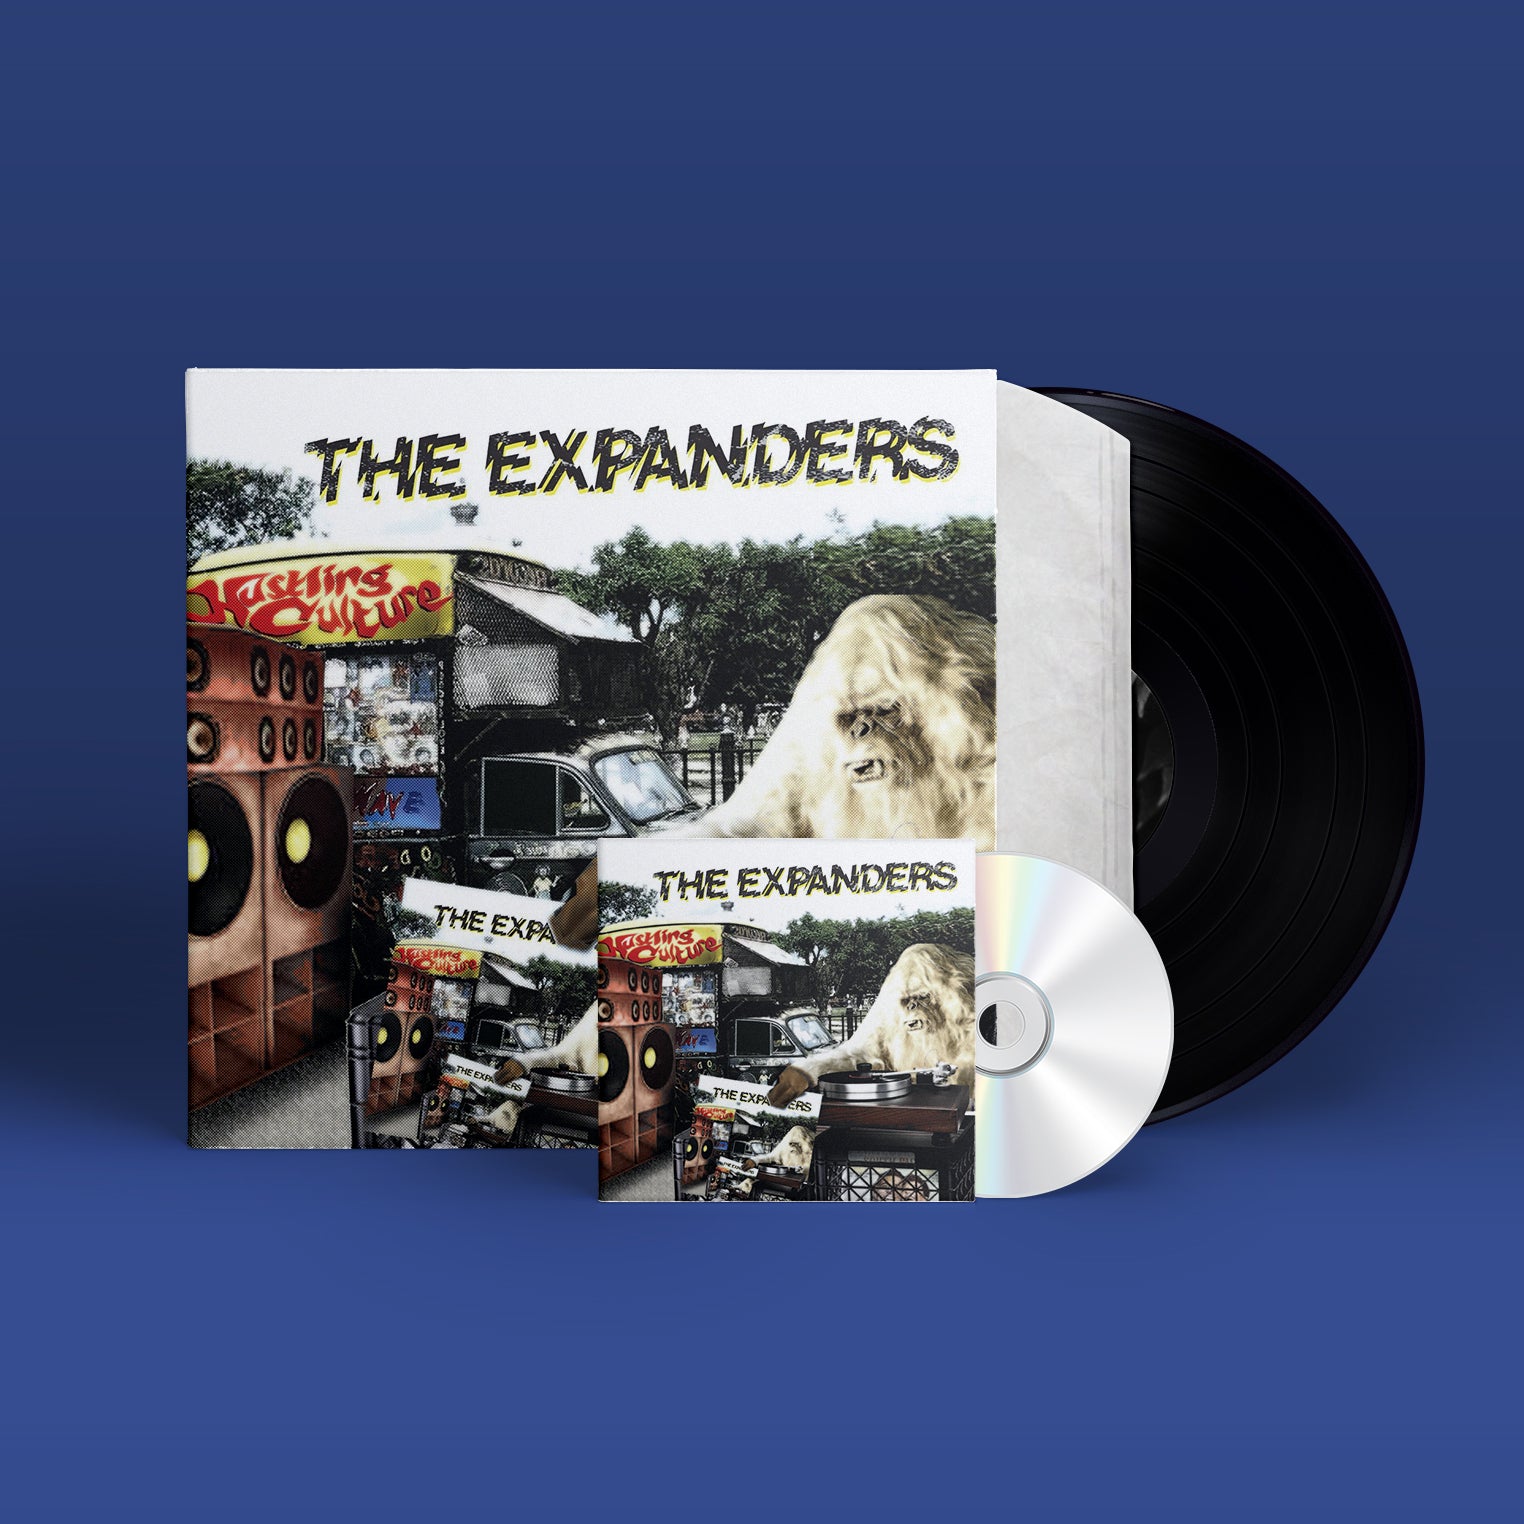 The Expanders - Hustling Culture